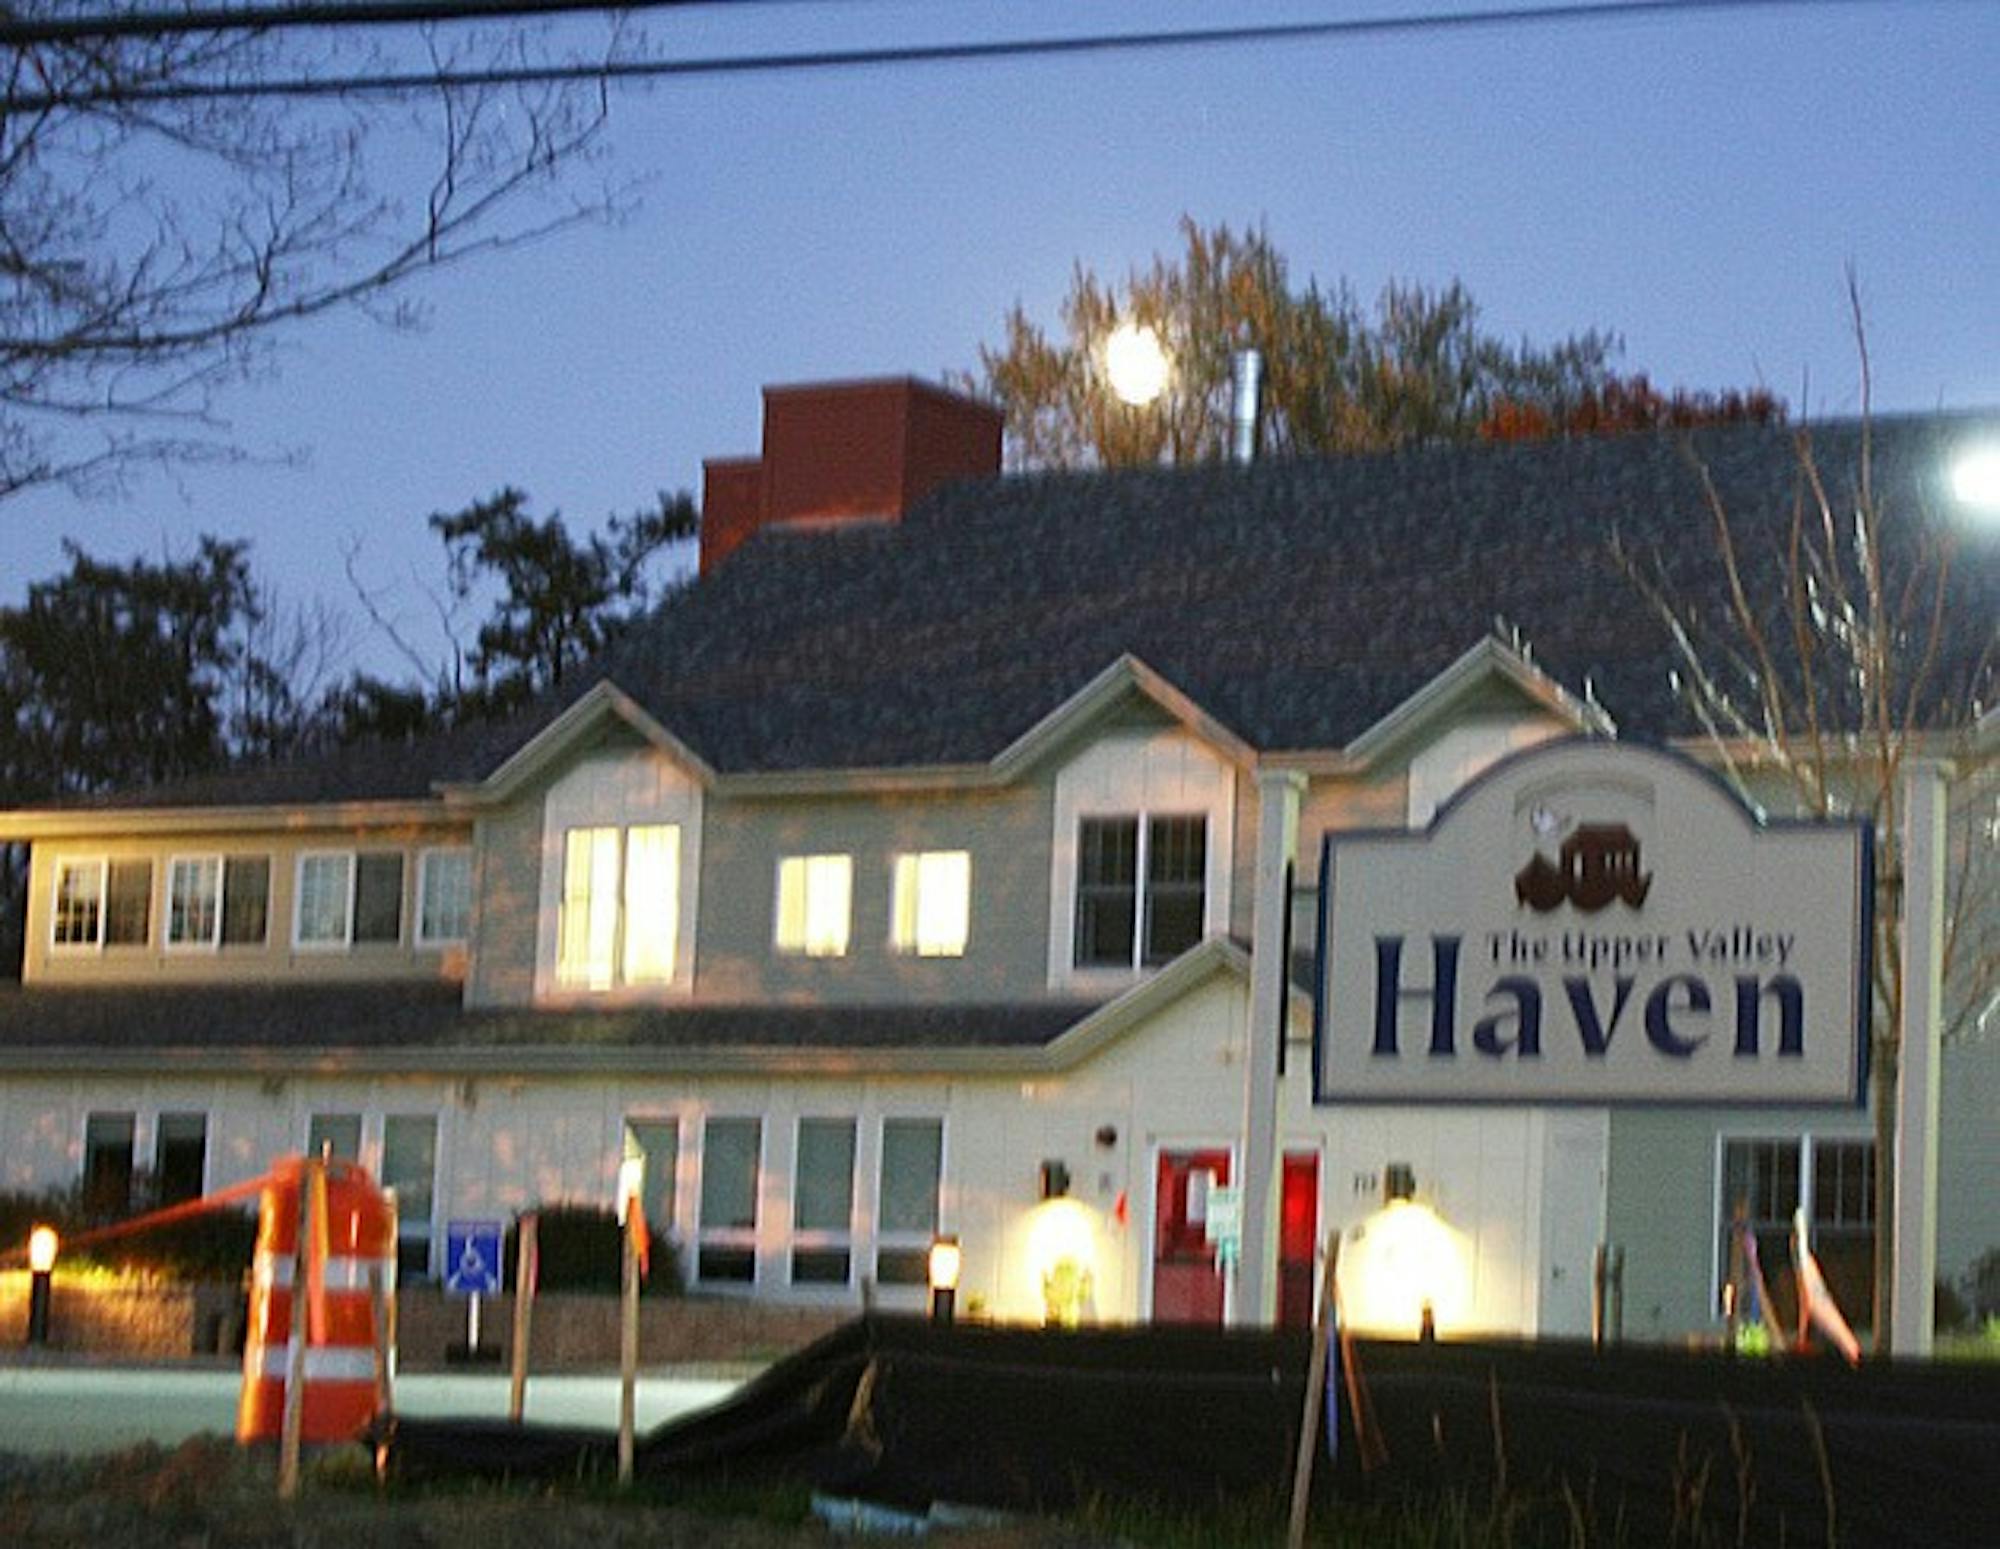 Currently the subject of much debate in local government, this is Haven's third attempt to open a homeless shelter in the Upper Valley.